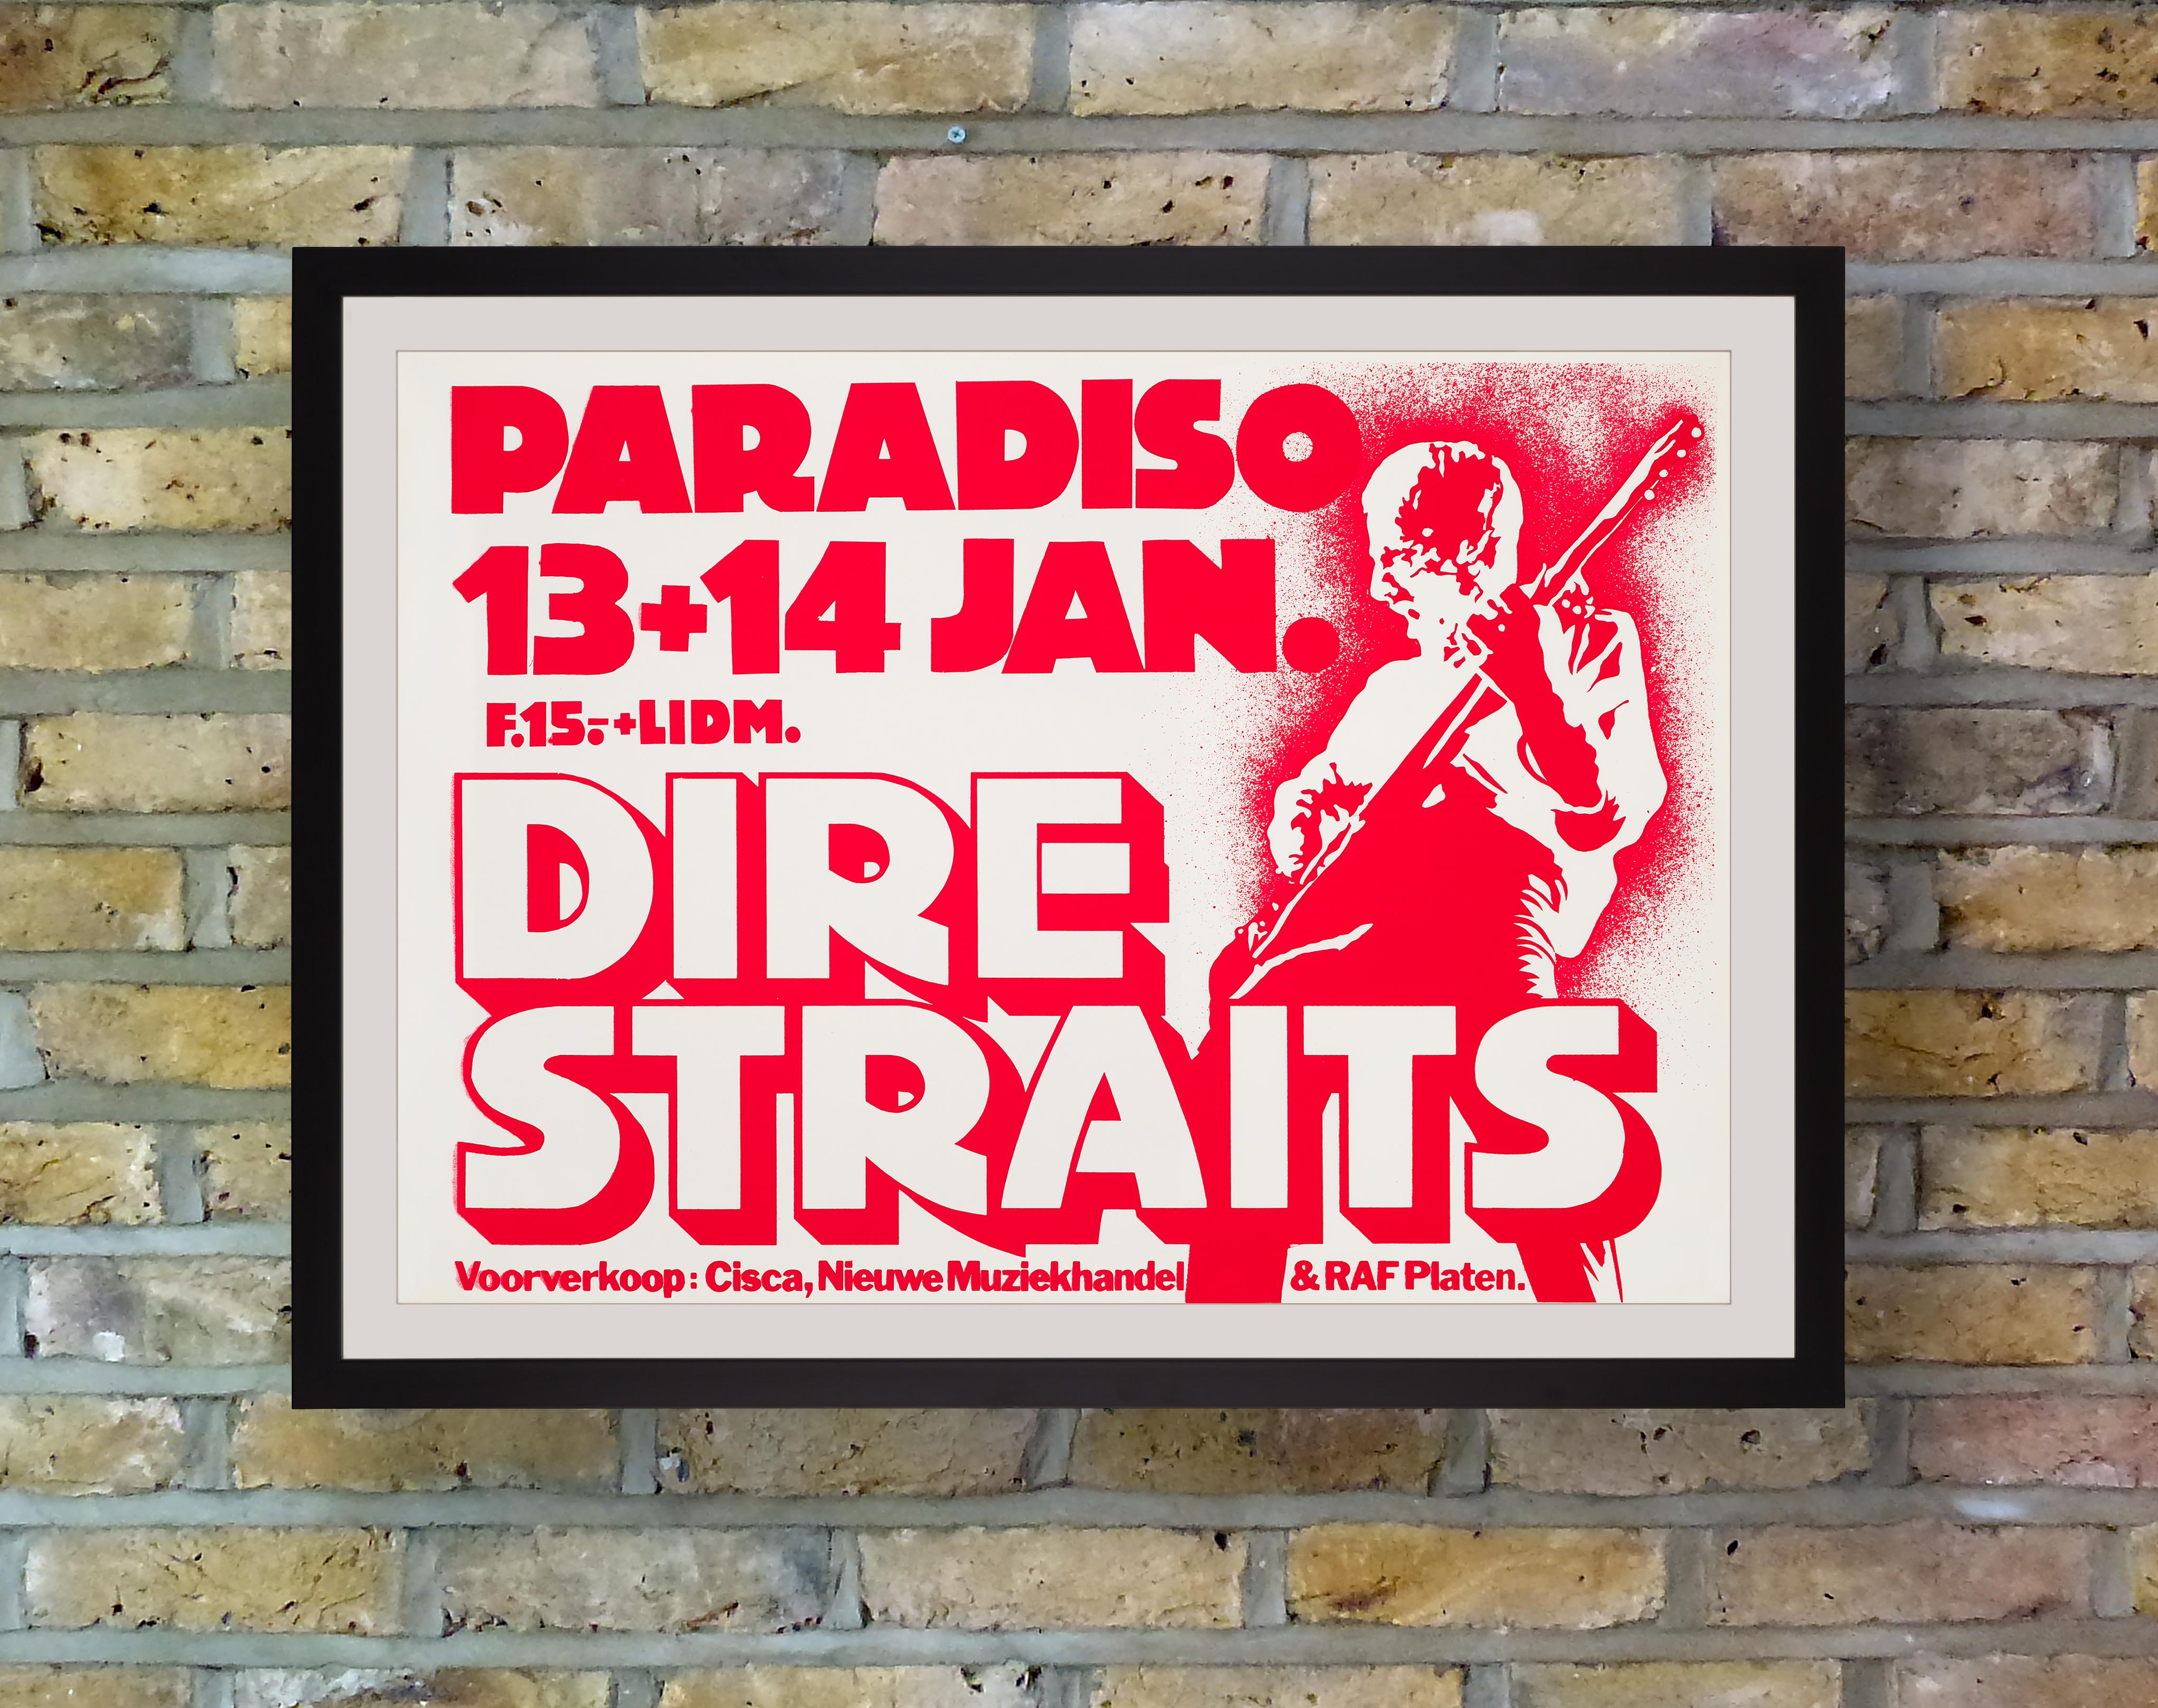 Boldly silkscreen printed in vibrant red ink, this dynamic poster promoted a performance by Dire Straits at the Paradiso Club in Amsterdam on 13th and 14th January 1981, following the release of the British rock band's third album 'Making Movies' on